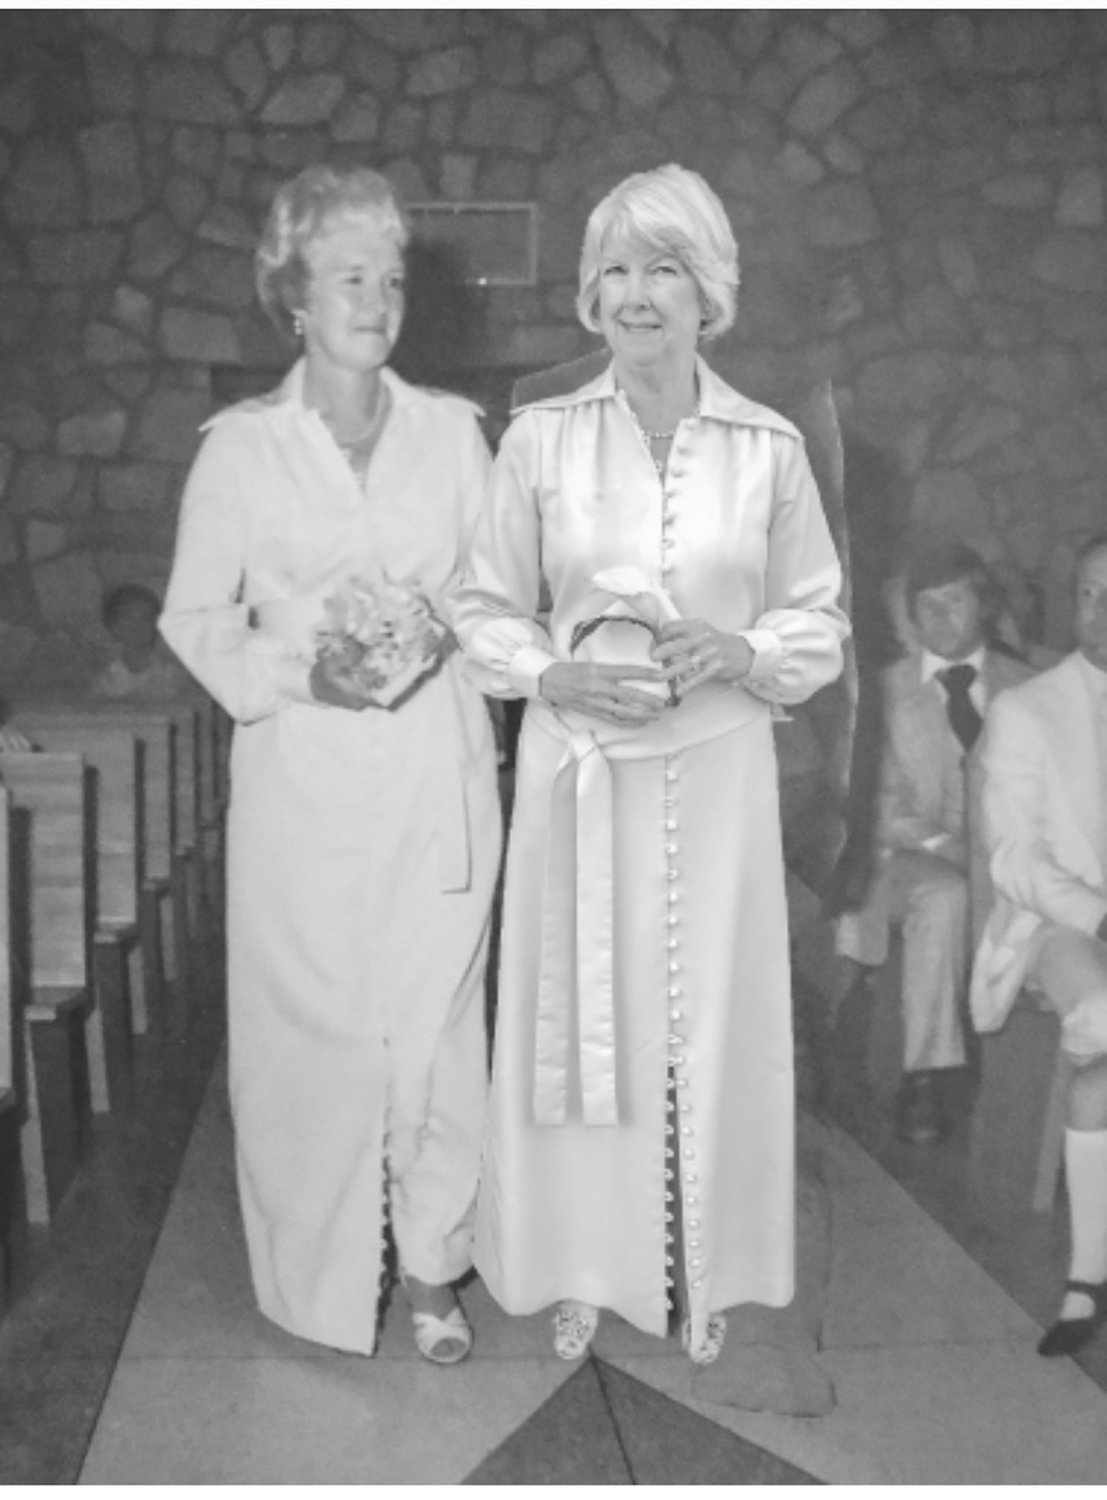 SHARED WEDDING DRESS: In glorious black and white, and across time, Liz Metroka and her mother, Alice Rooney, stand side by side in their shared wedding dress.